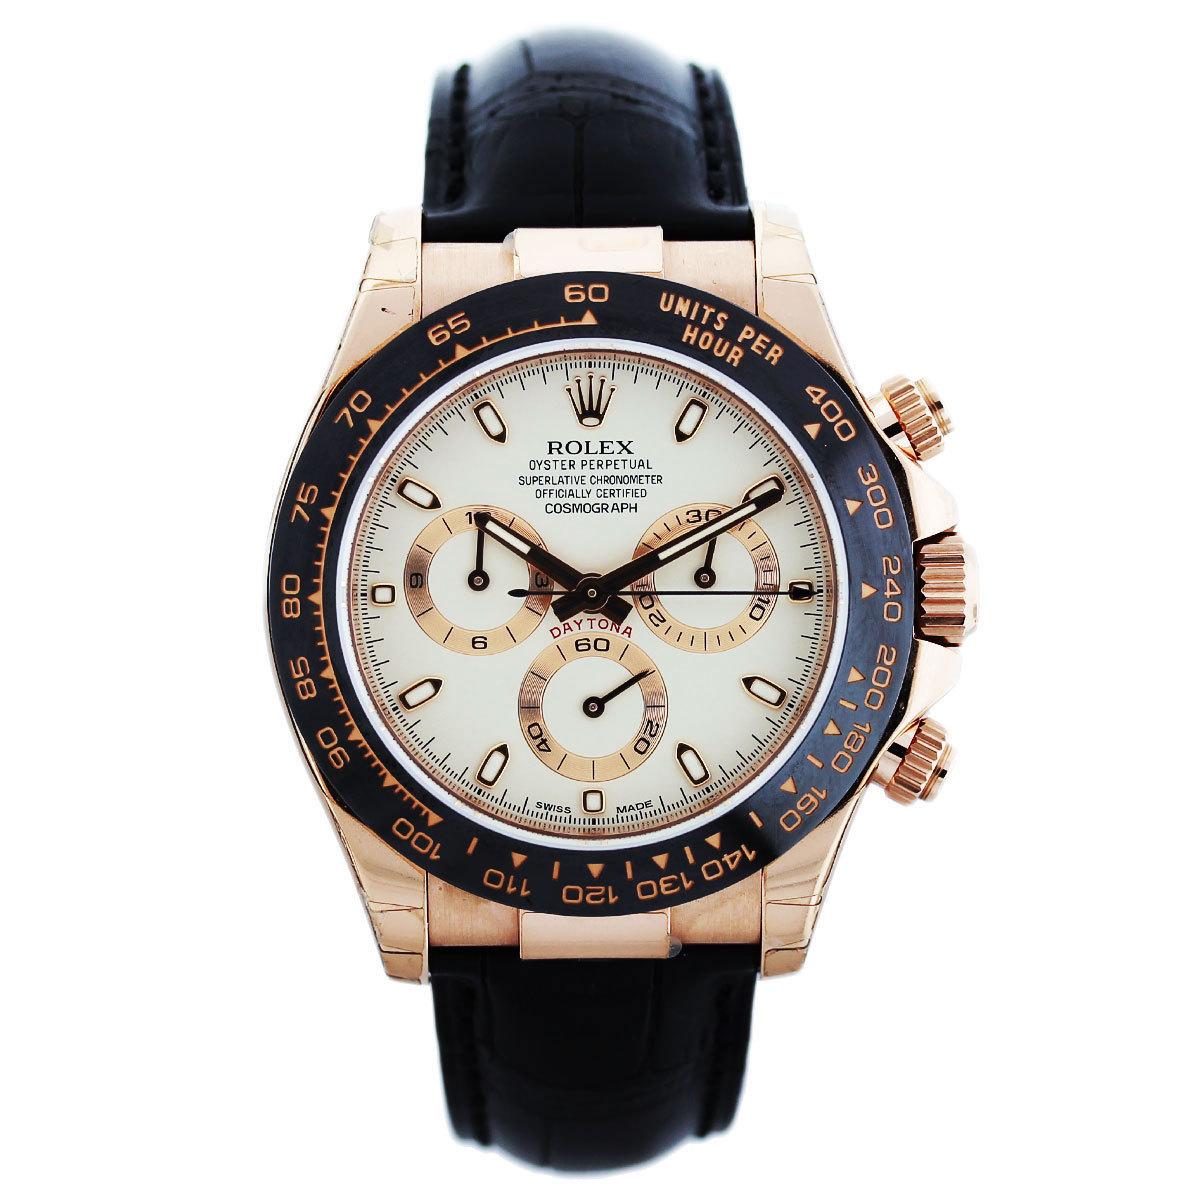 Watch of the Week: The Rolex Daytona 11615 in Rose Gold with Ceramic ...